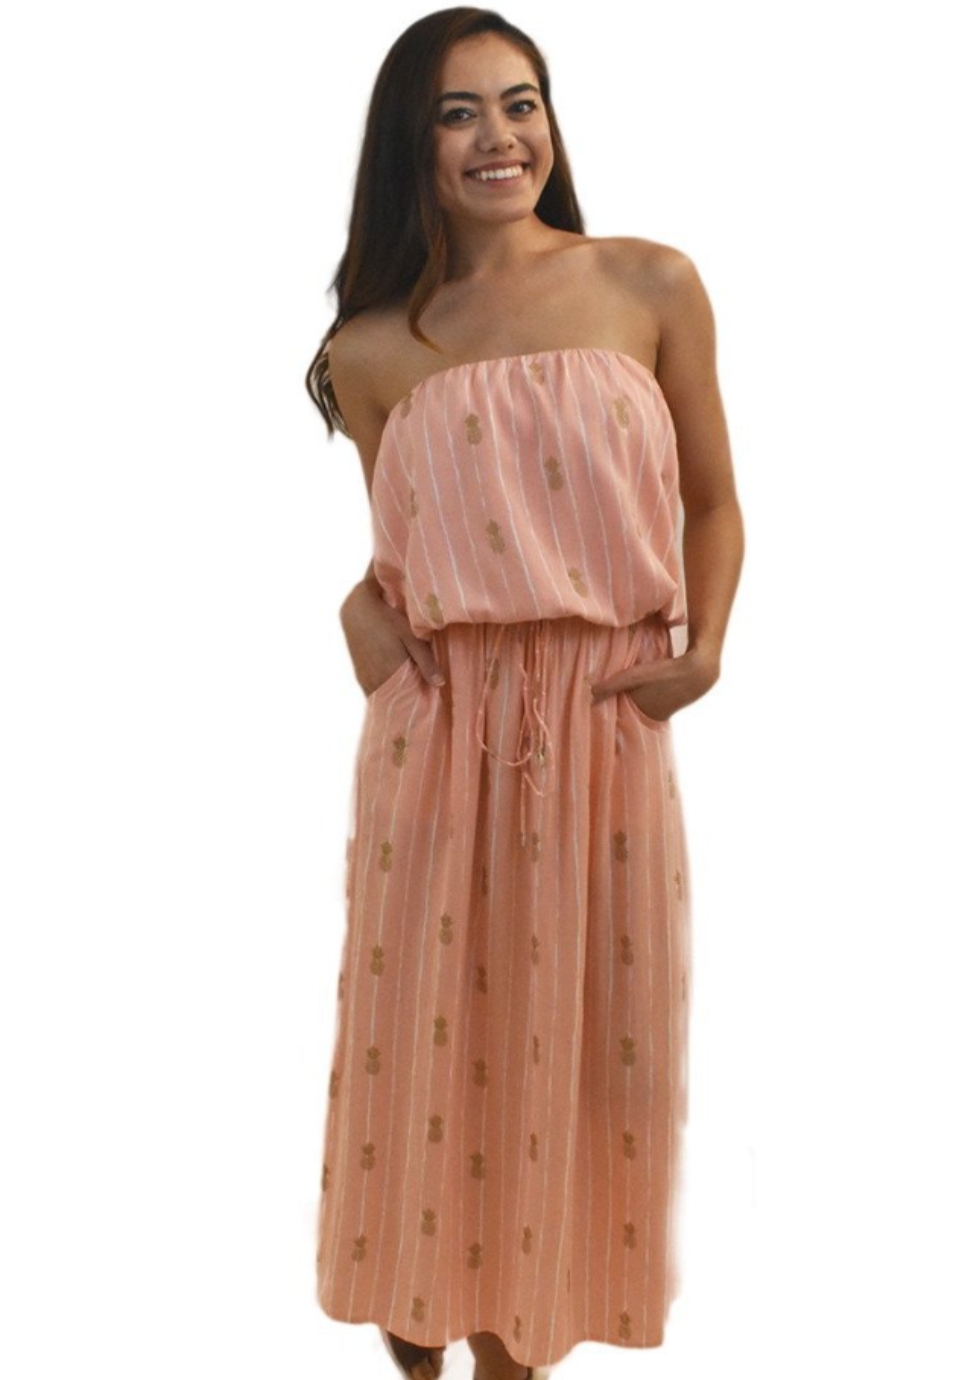 Pink long dress with gold stamp pineapple with straps and center tie and white stripes